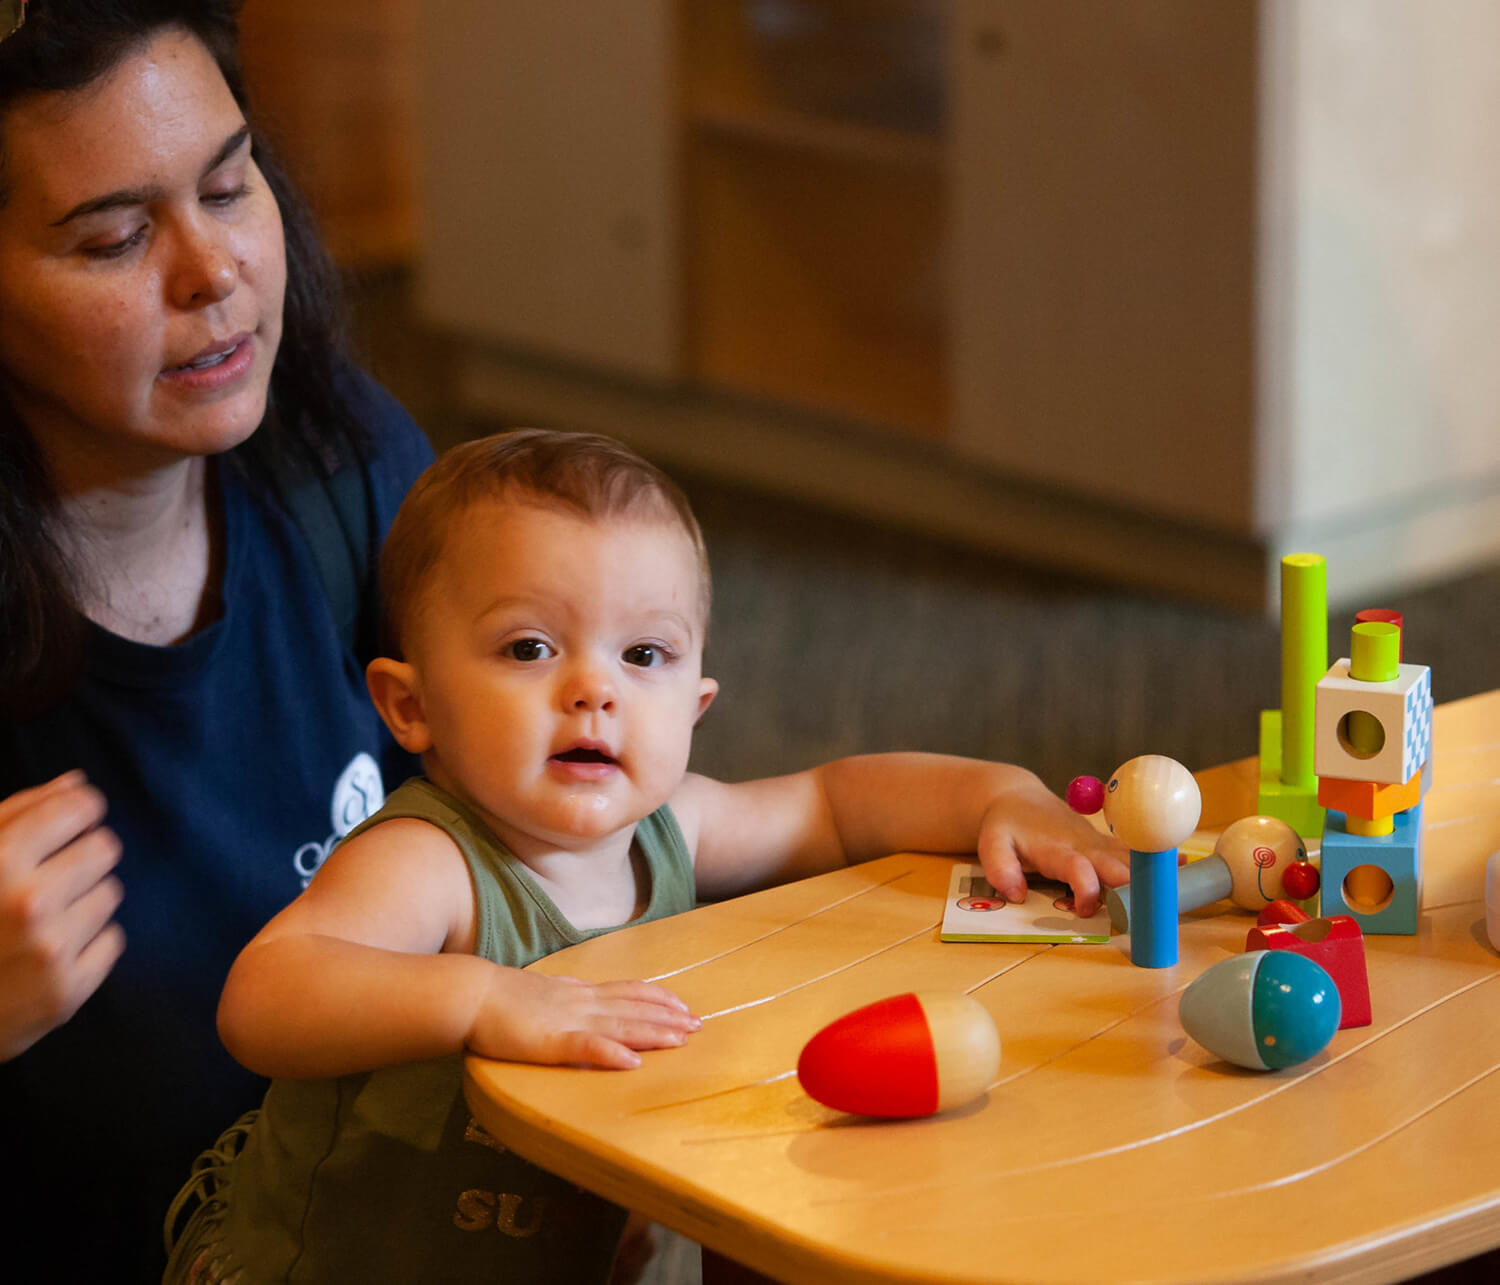 A baby plays with wooden toys at Wonderlab with a caregiver behind them